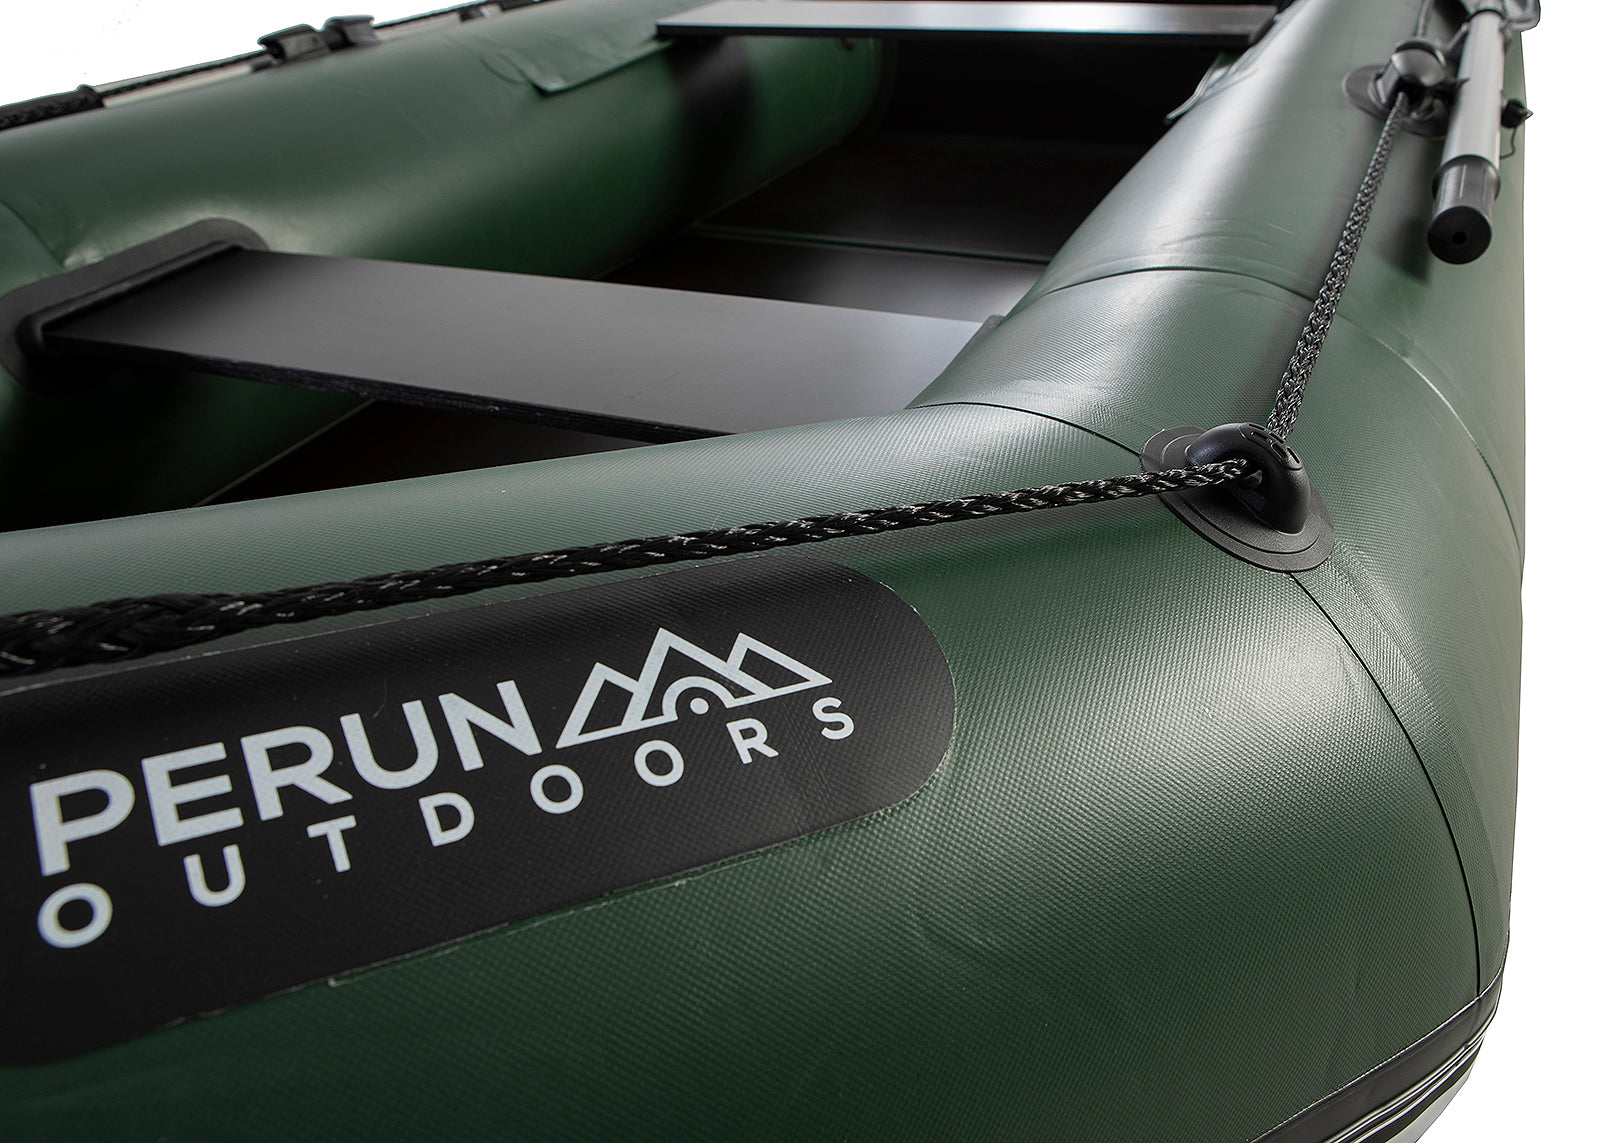 Inflatable Boats Canada – Perun Outdoors Boats